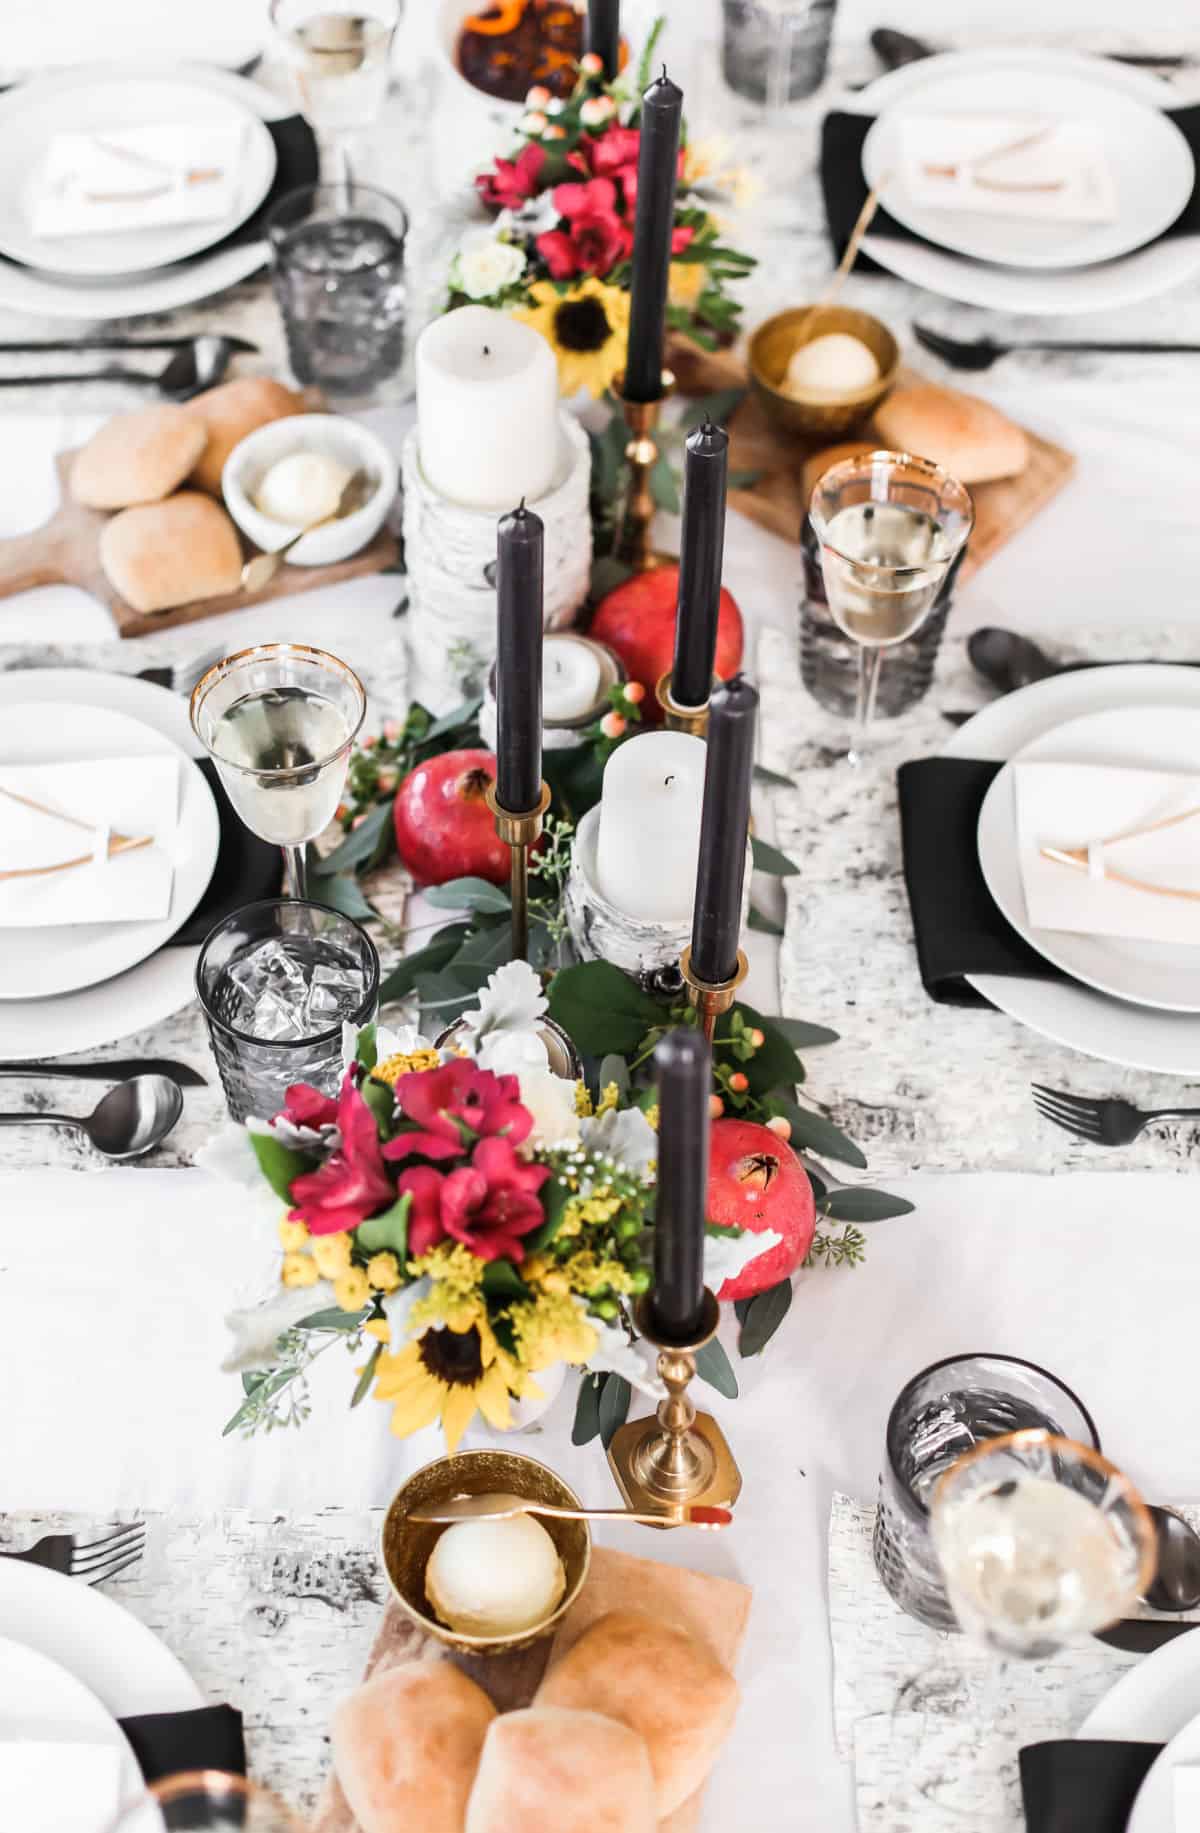 black and white table setting with fruit, greenery and candlesticks centerpiece.